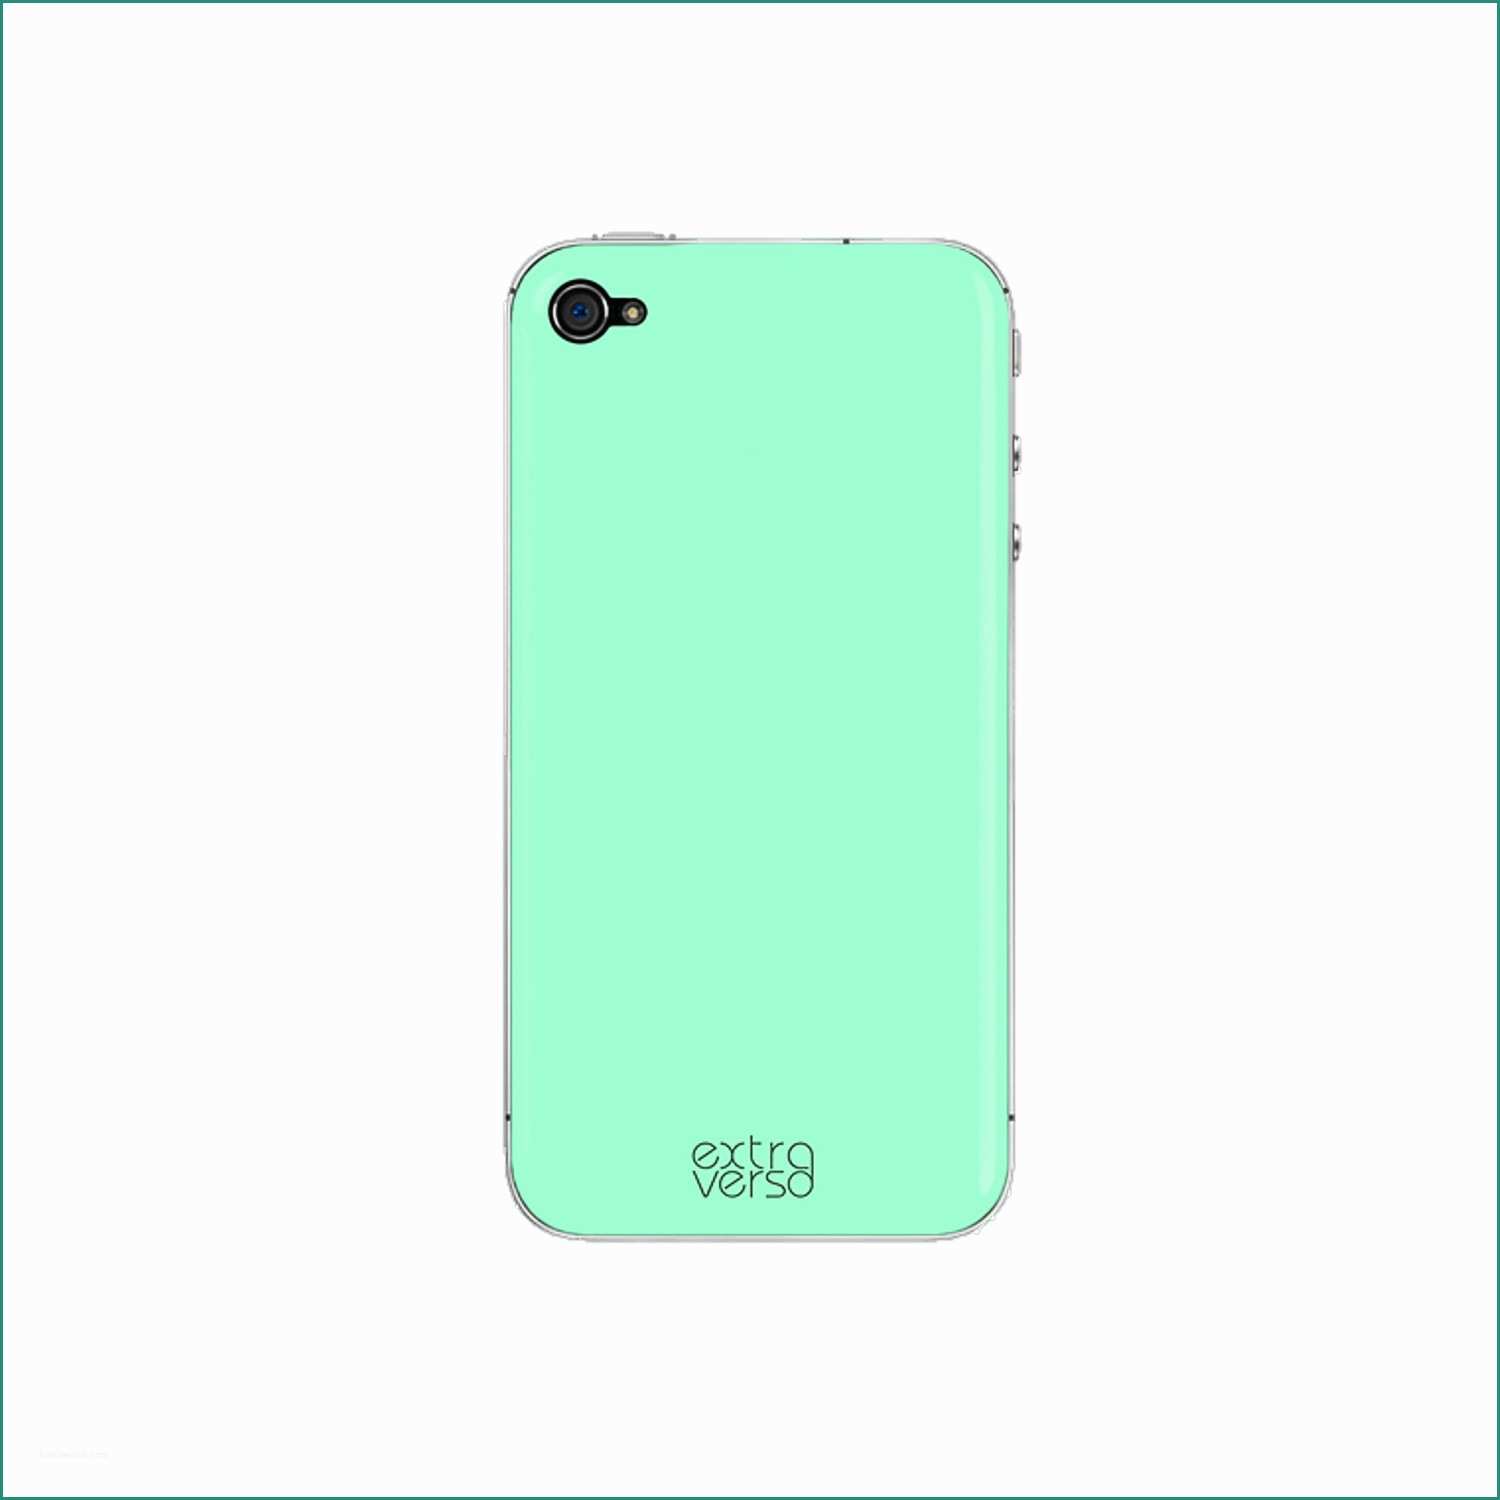 Case Mobili Moderne E iPhone Case Turquoise Sea iPhone 5 5s Extra Verso touch Of